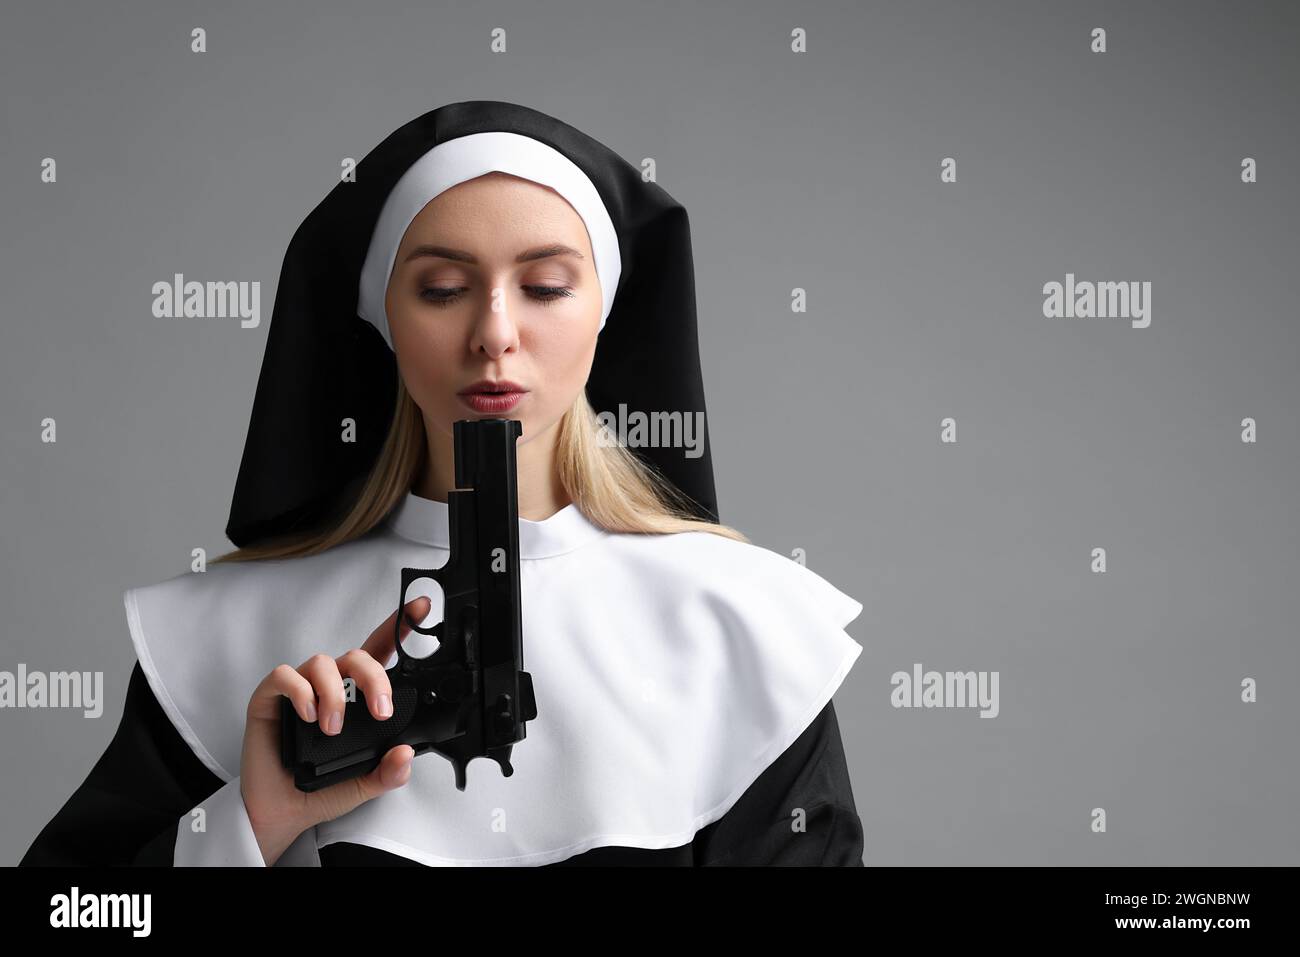 Woman in nun habit holding handgun on grey background. Space for text Stock Photo